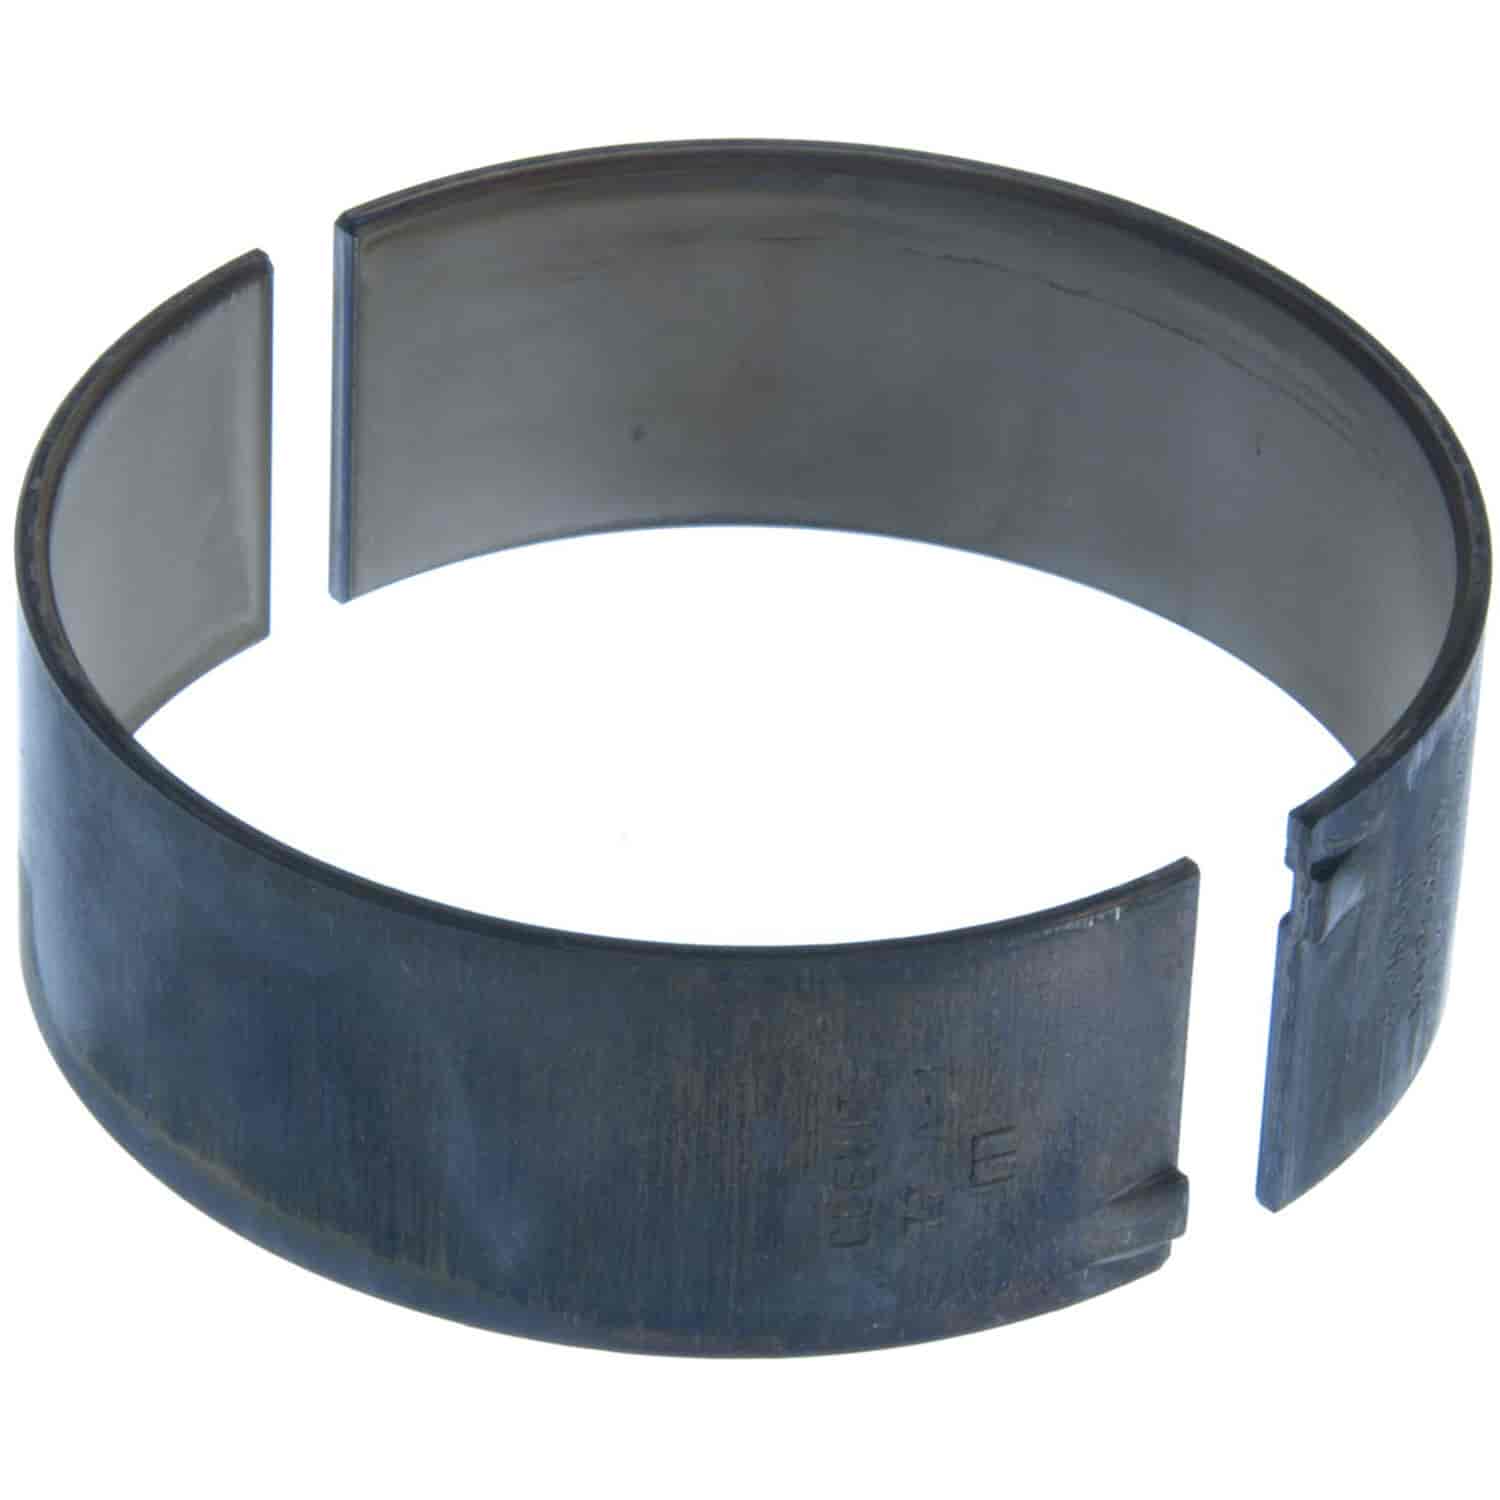 Connecting Rod Bearing Pontiac 1956-1979 V8 316/326/347/350/370/389/400/403/421/428/455 with Standard Size